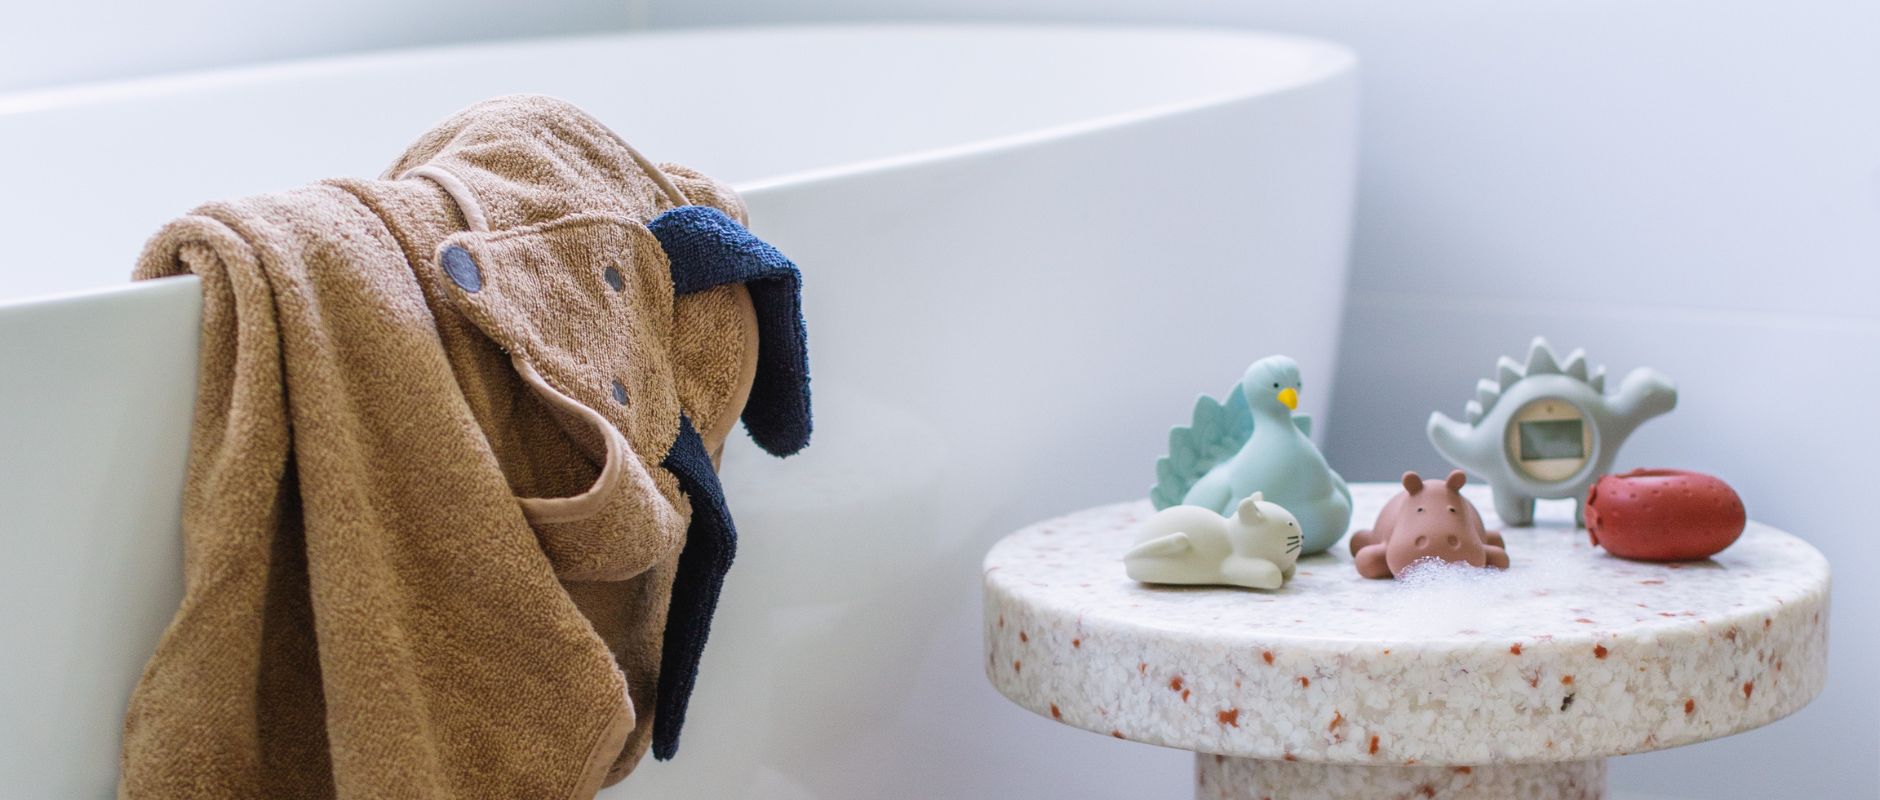 This image is of a cute bath set up for a young child or toddler. It shows a bath tub with a dog shaped hooded towel draped over the side (by LIEWOOD), a speckled side table made by NORMANN COPENHAGEN, and plenty of colourful bath toys and thermometers by LIEWOOD, NATRUBA and KONGES SLOJD. The bath toys are shaped as animals and include a cat, a peacock, and a hippo. There are plenty of soap suds everywhere.